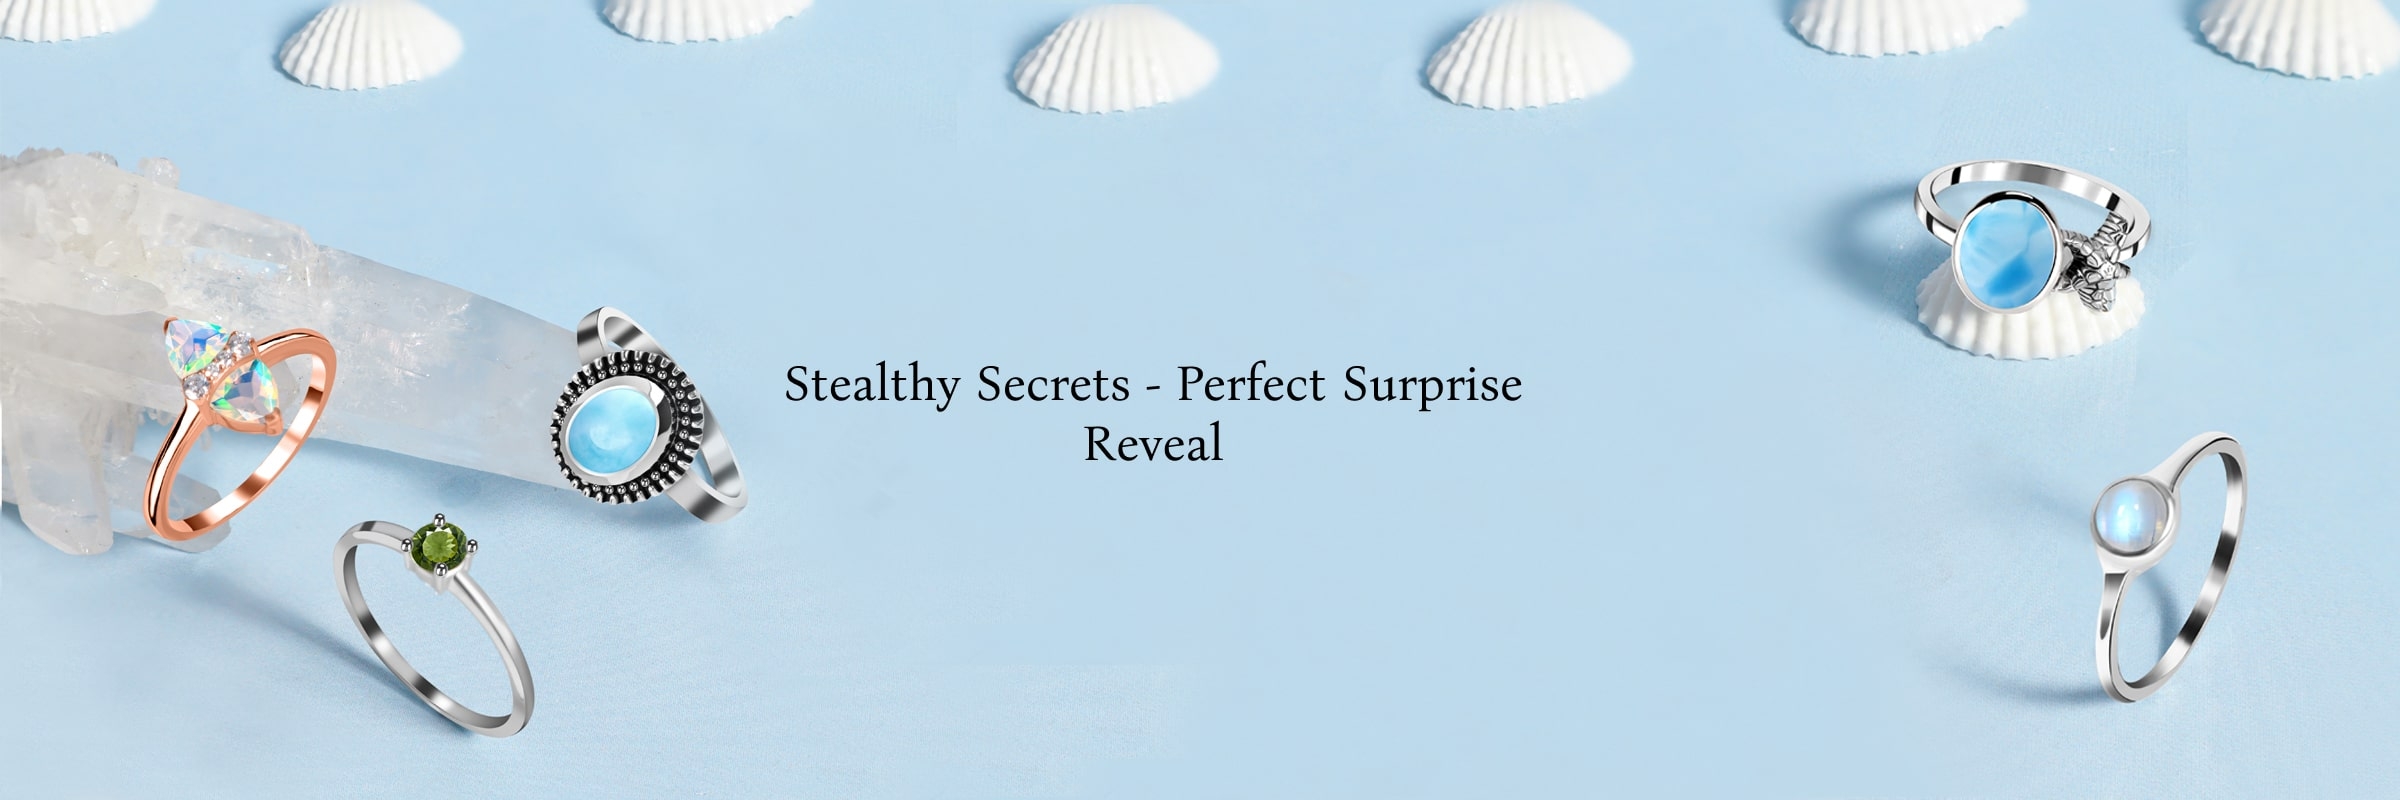 Making It a Surprise: Stealthy Tactics for the Perfect Reveal